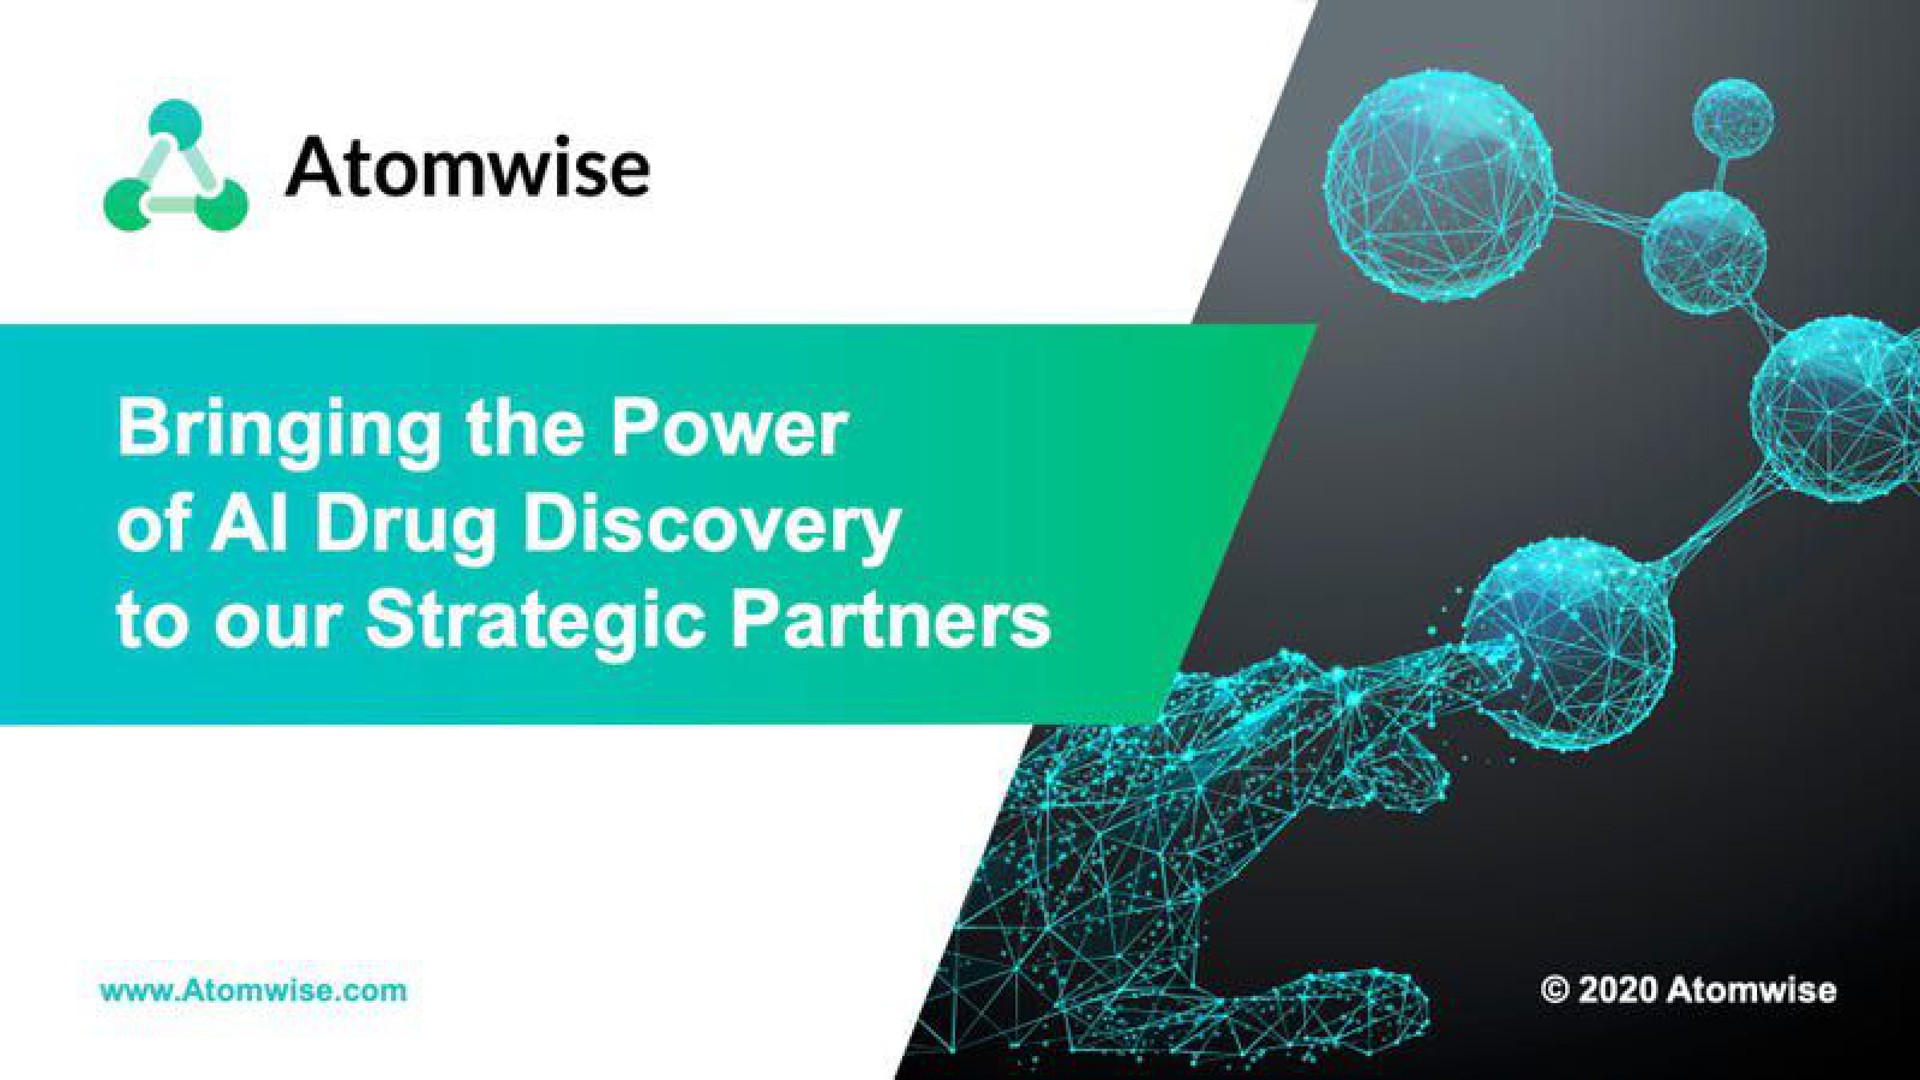 a bringing the power of drug discovery to our strategic partners | Atomwise